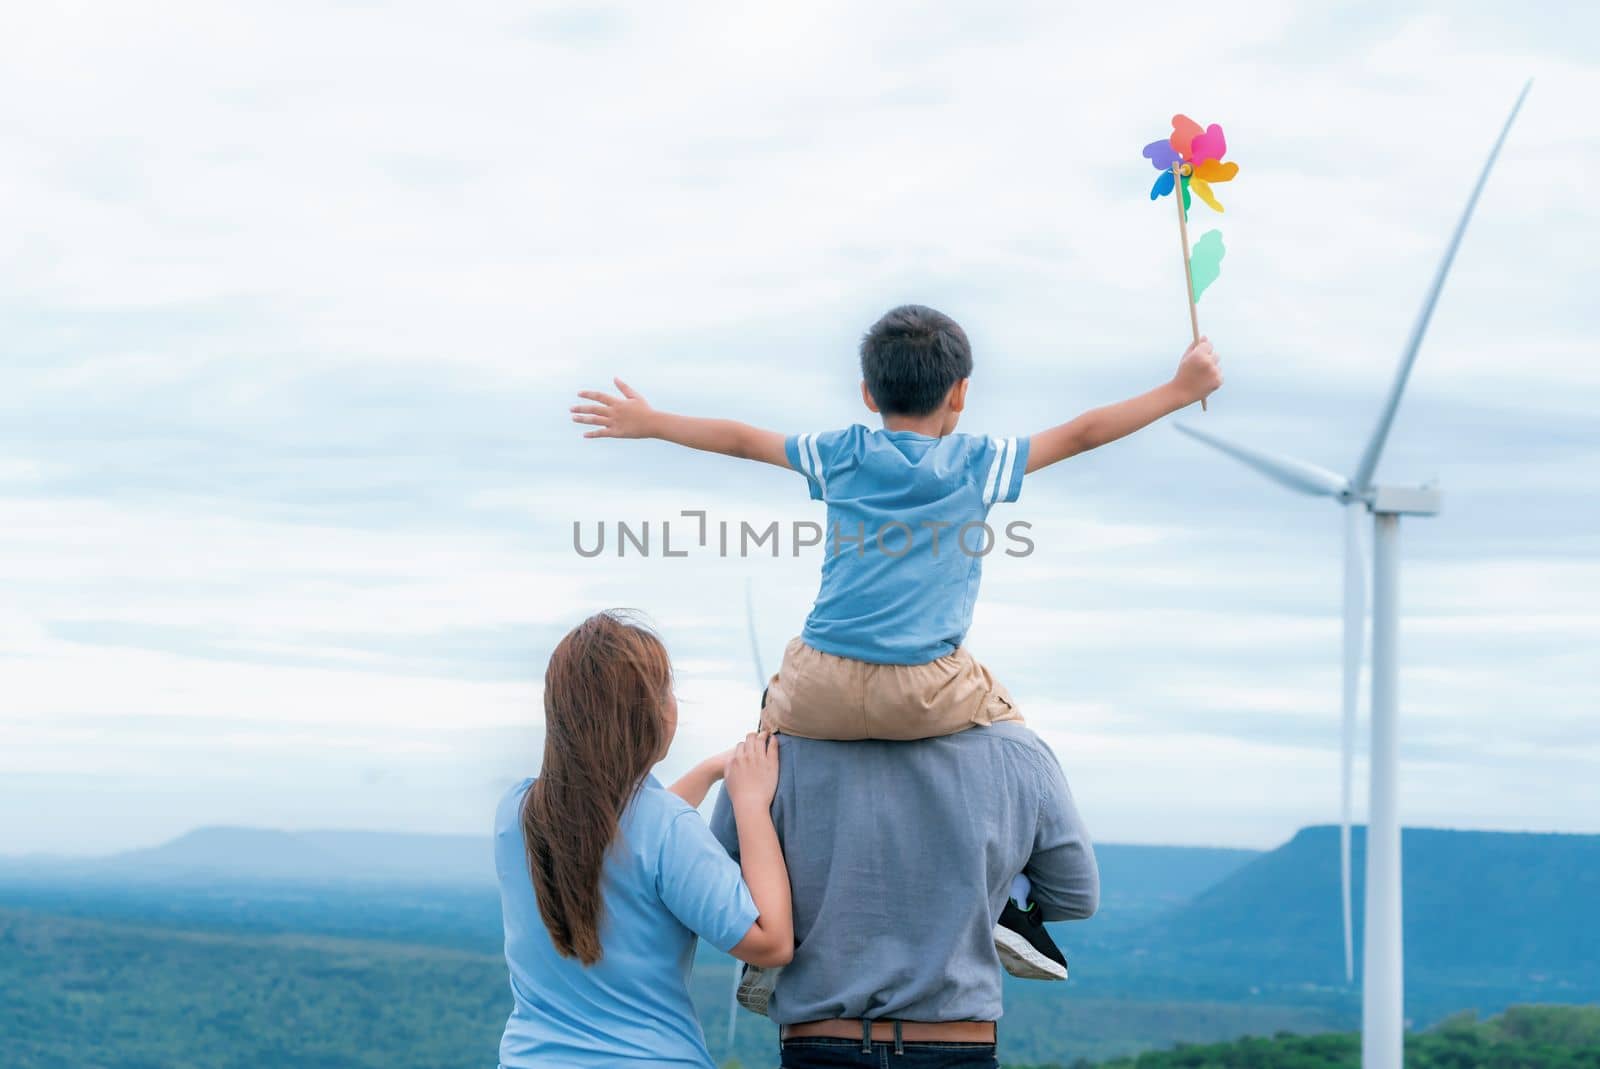 Progressive happy family enjoying their time at wind farm for green energy production concept. Wind turbine generators provide clean renewable energy for eco-friendly purposes.